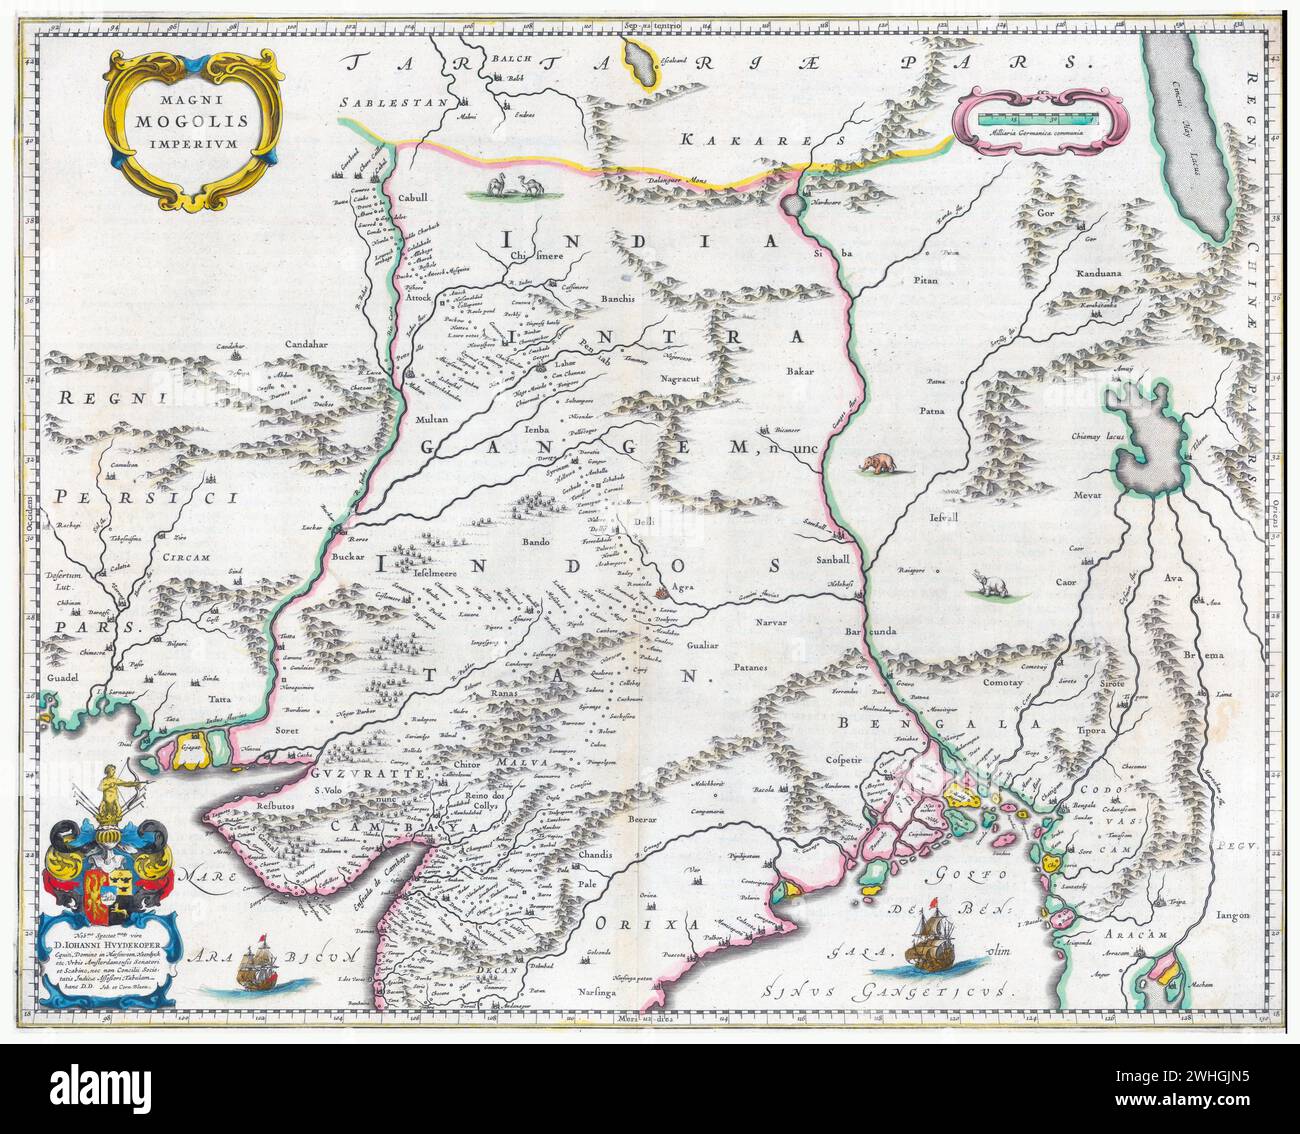 Historical map of The Great Mughal Empire, Willem and Johannes Joan Blaeu, ca 1663 *** Historical map of The Great Mughal Empire, Willem and Johannes Joan Blaeu, ca 1663 Stock Photo